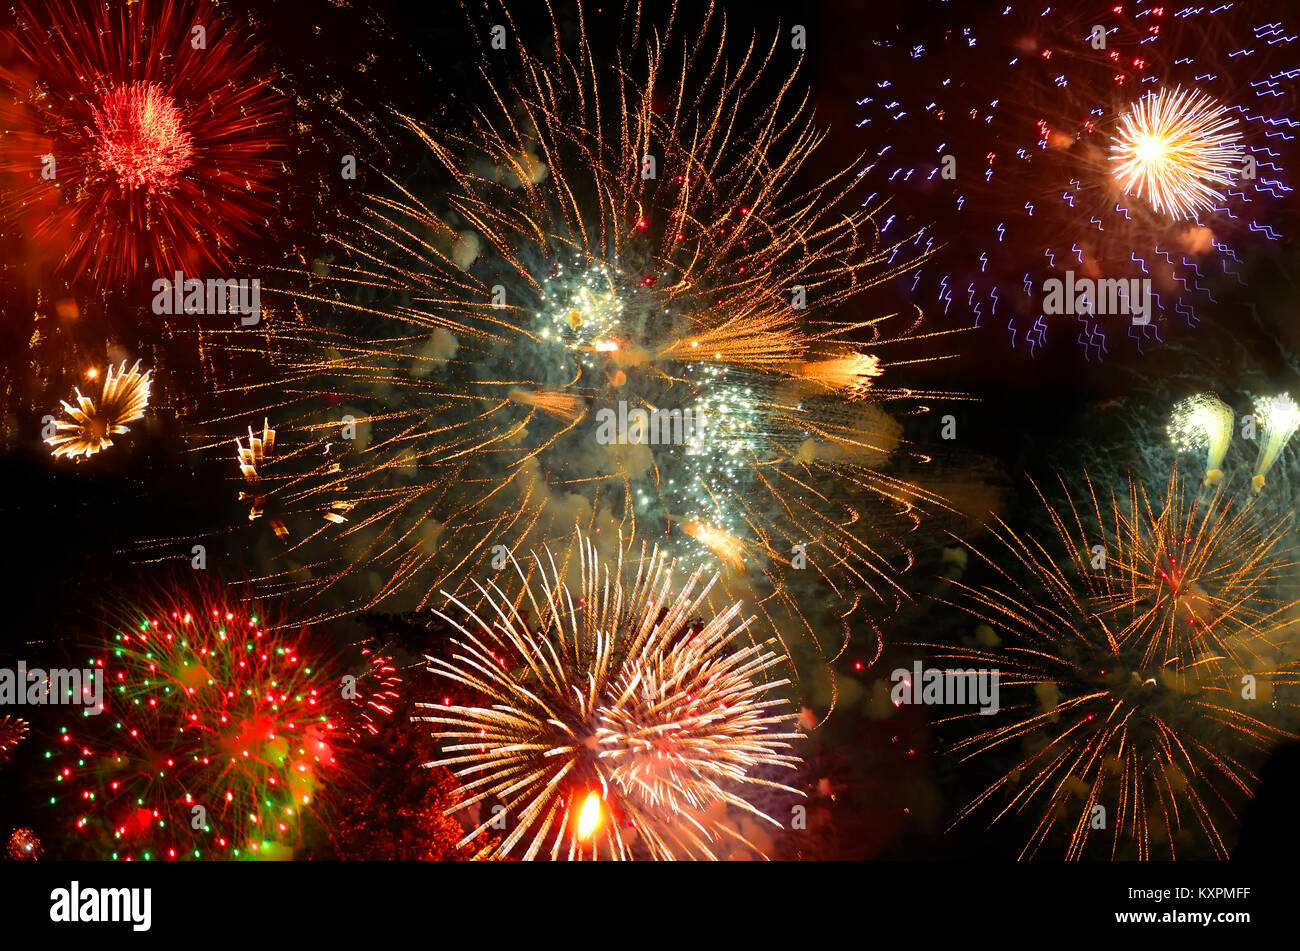 Realistic Fireworks exploding with clouds of smoke in the night sky - bright festive background. Stock Photo